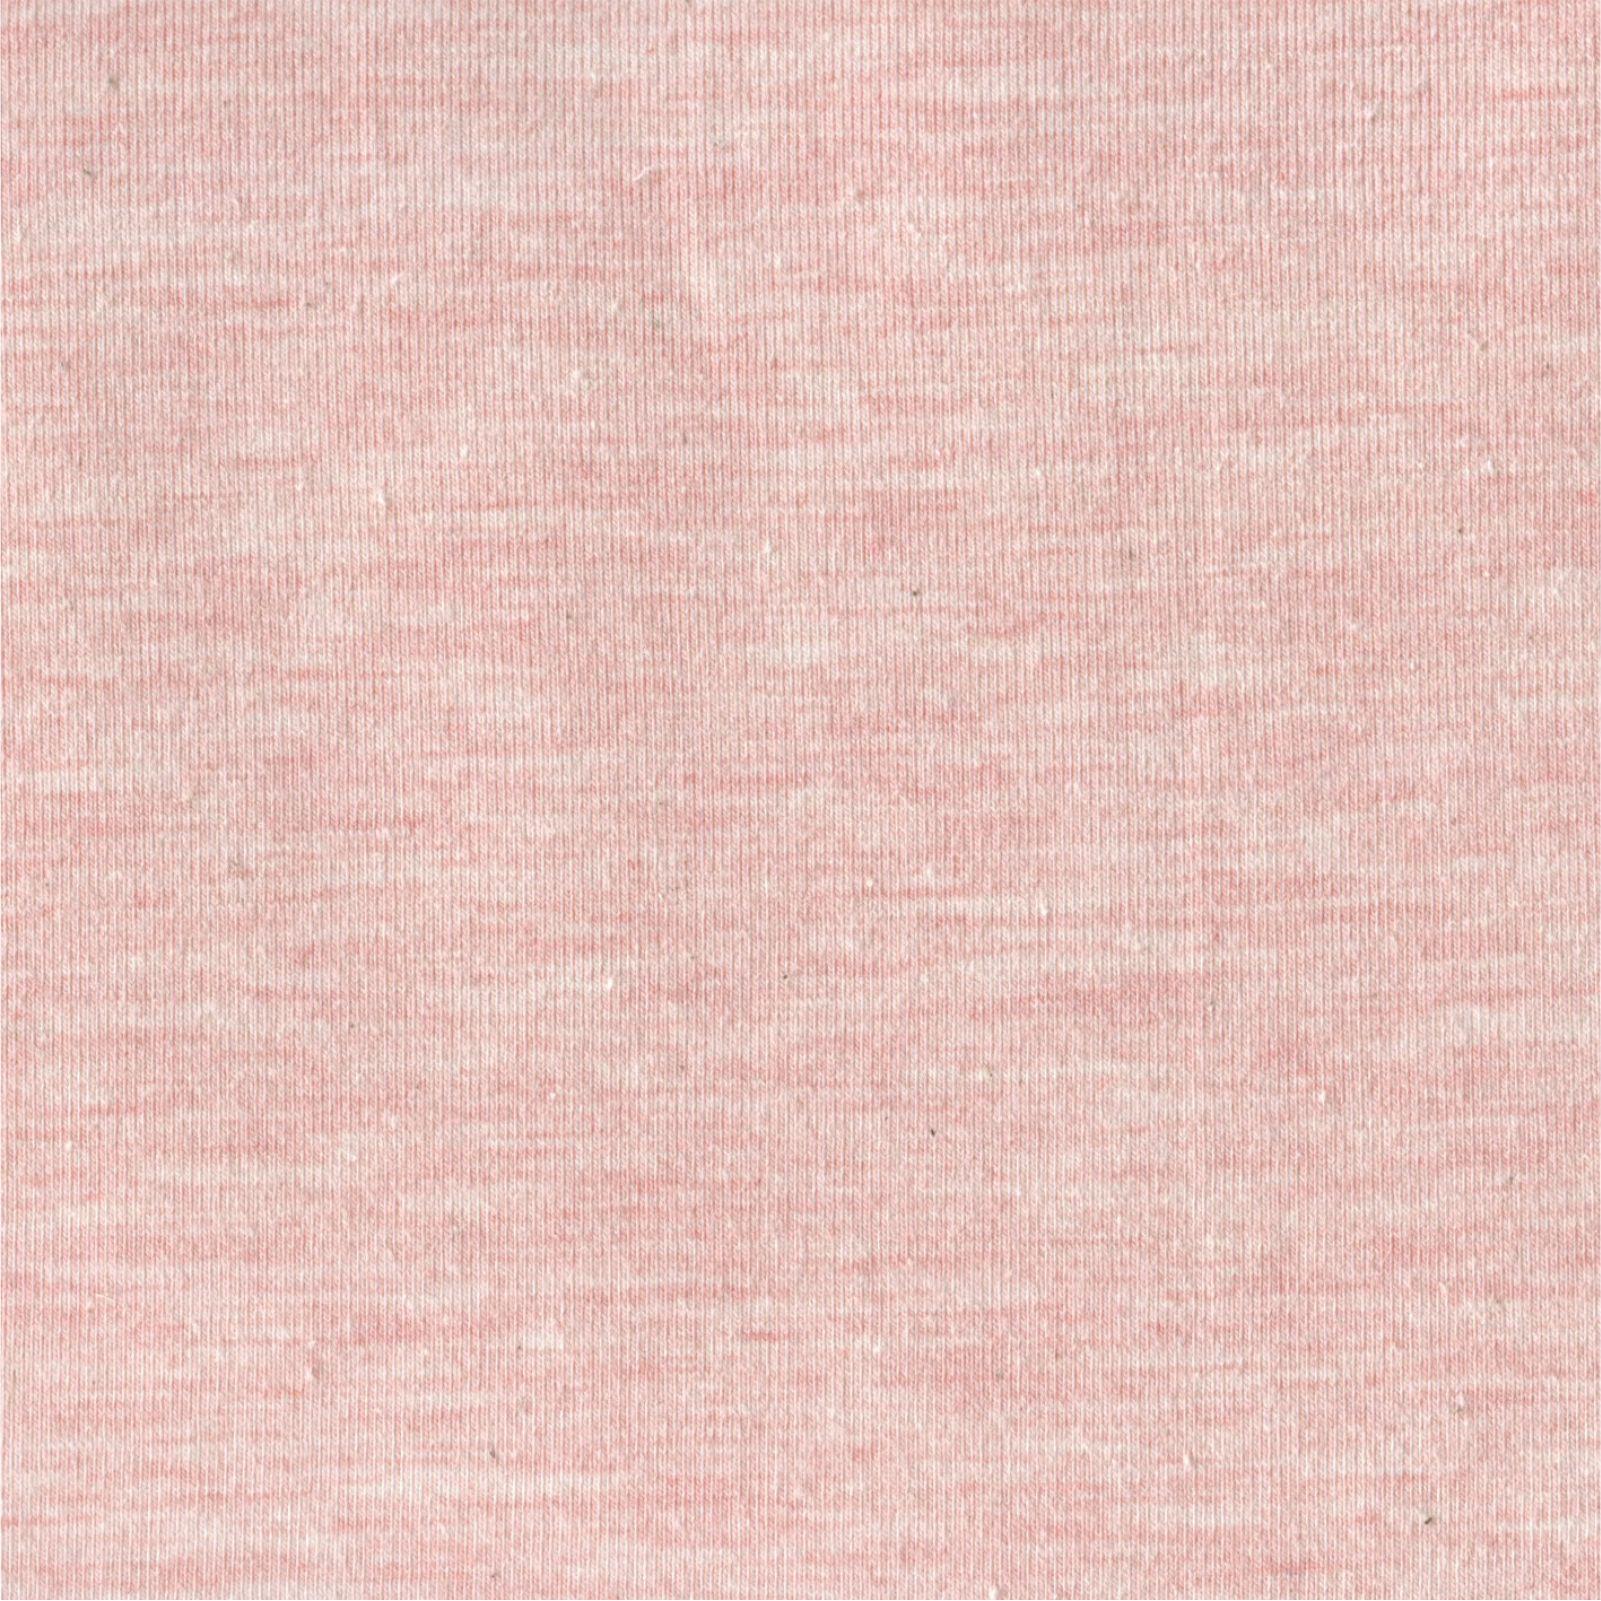 Buy Cotton Jersey Fabric - Pink Marl - 150cm Wide